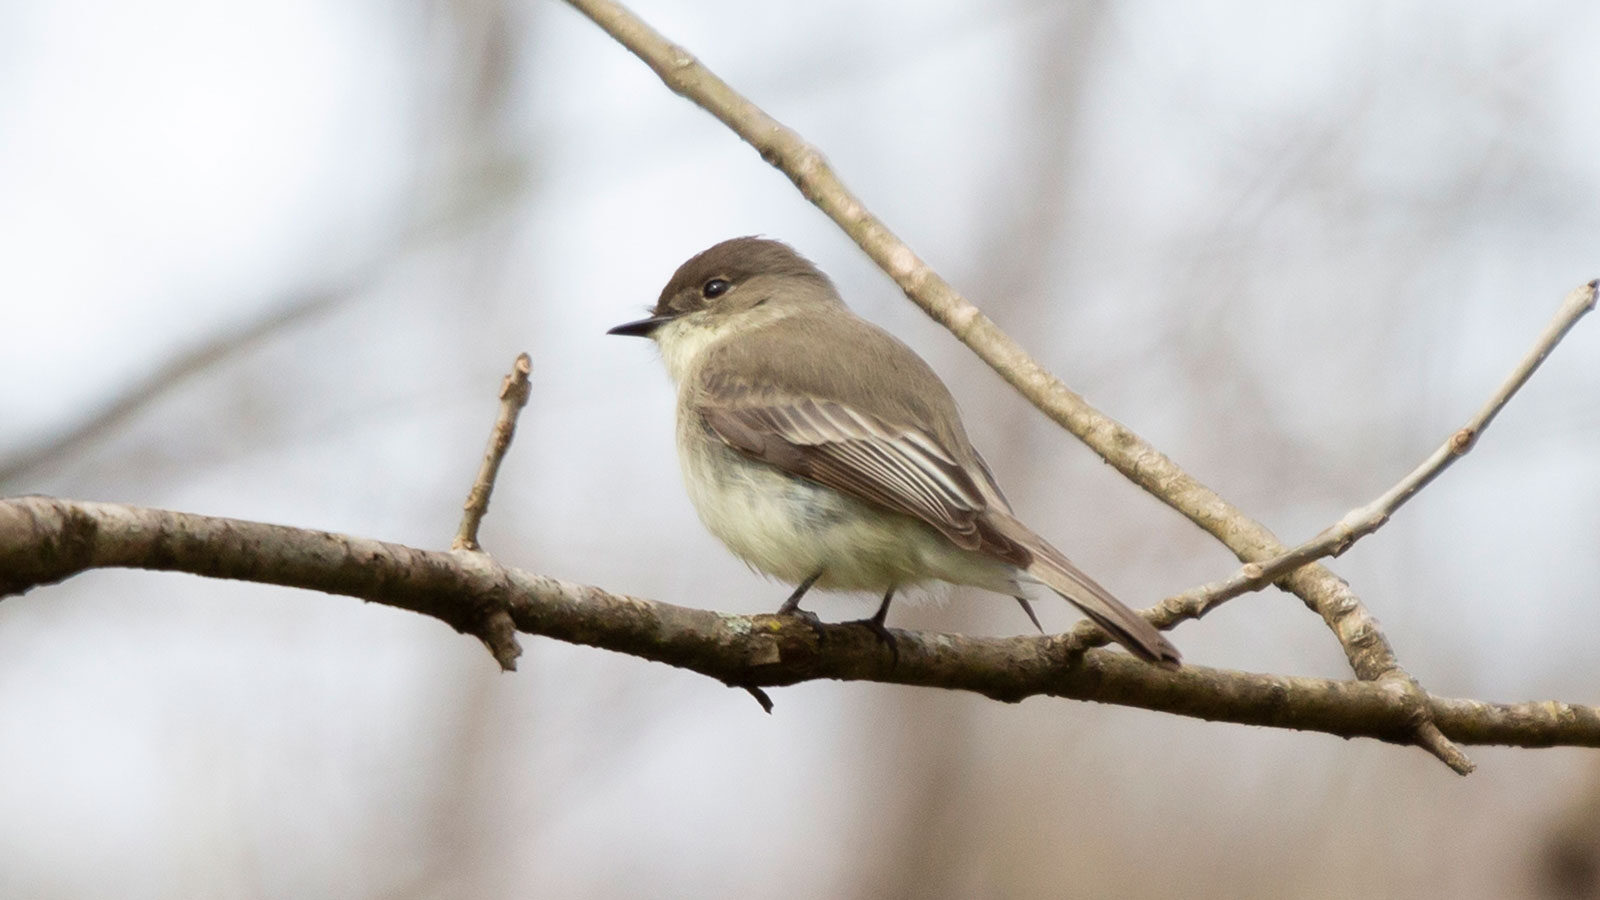 Eastern phoebe looking around from its perch on a tree limb